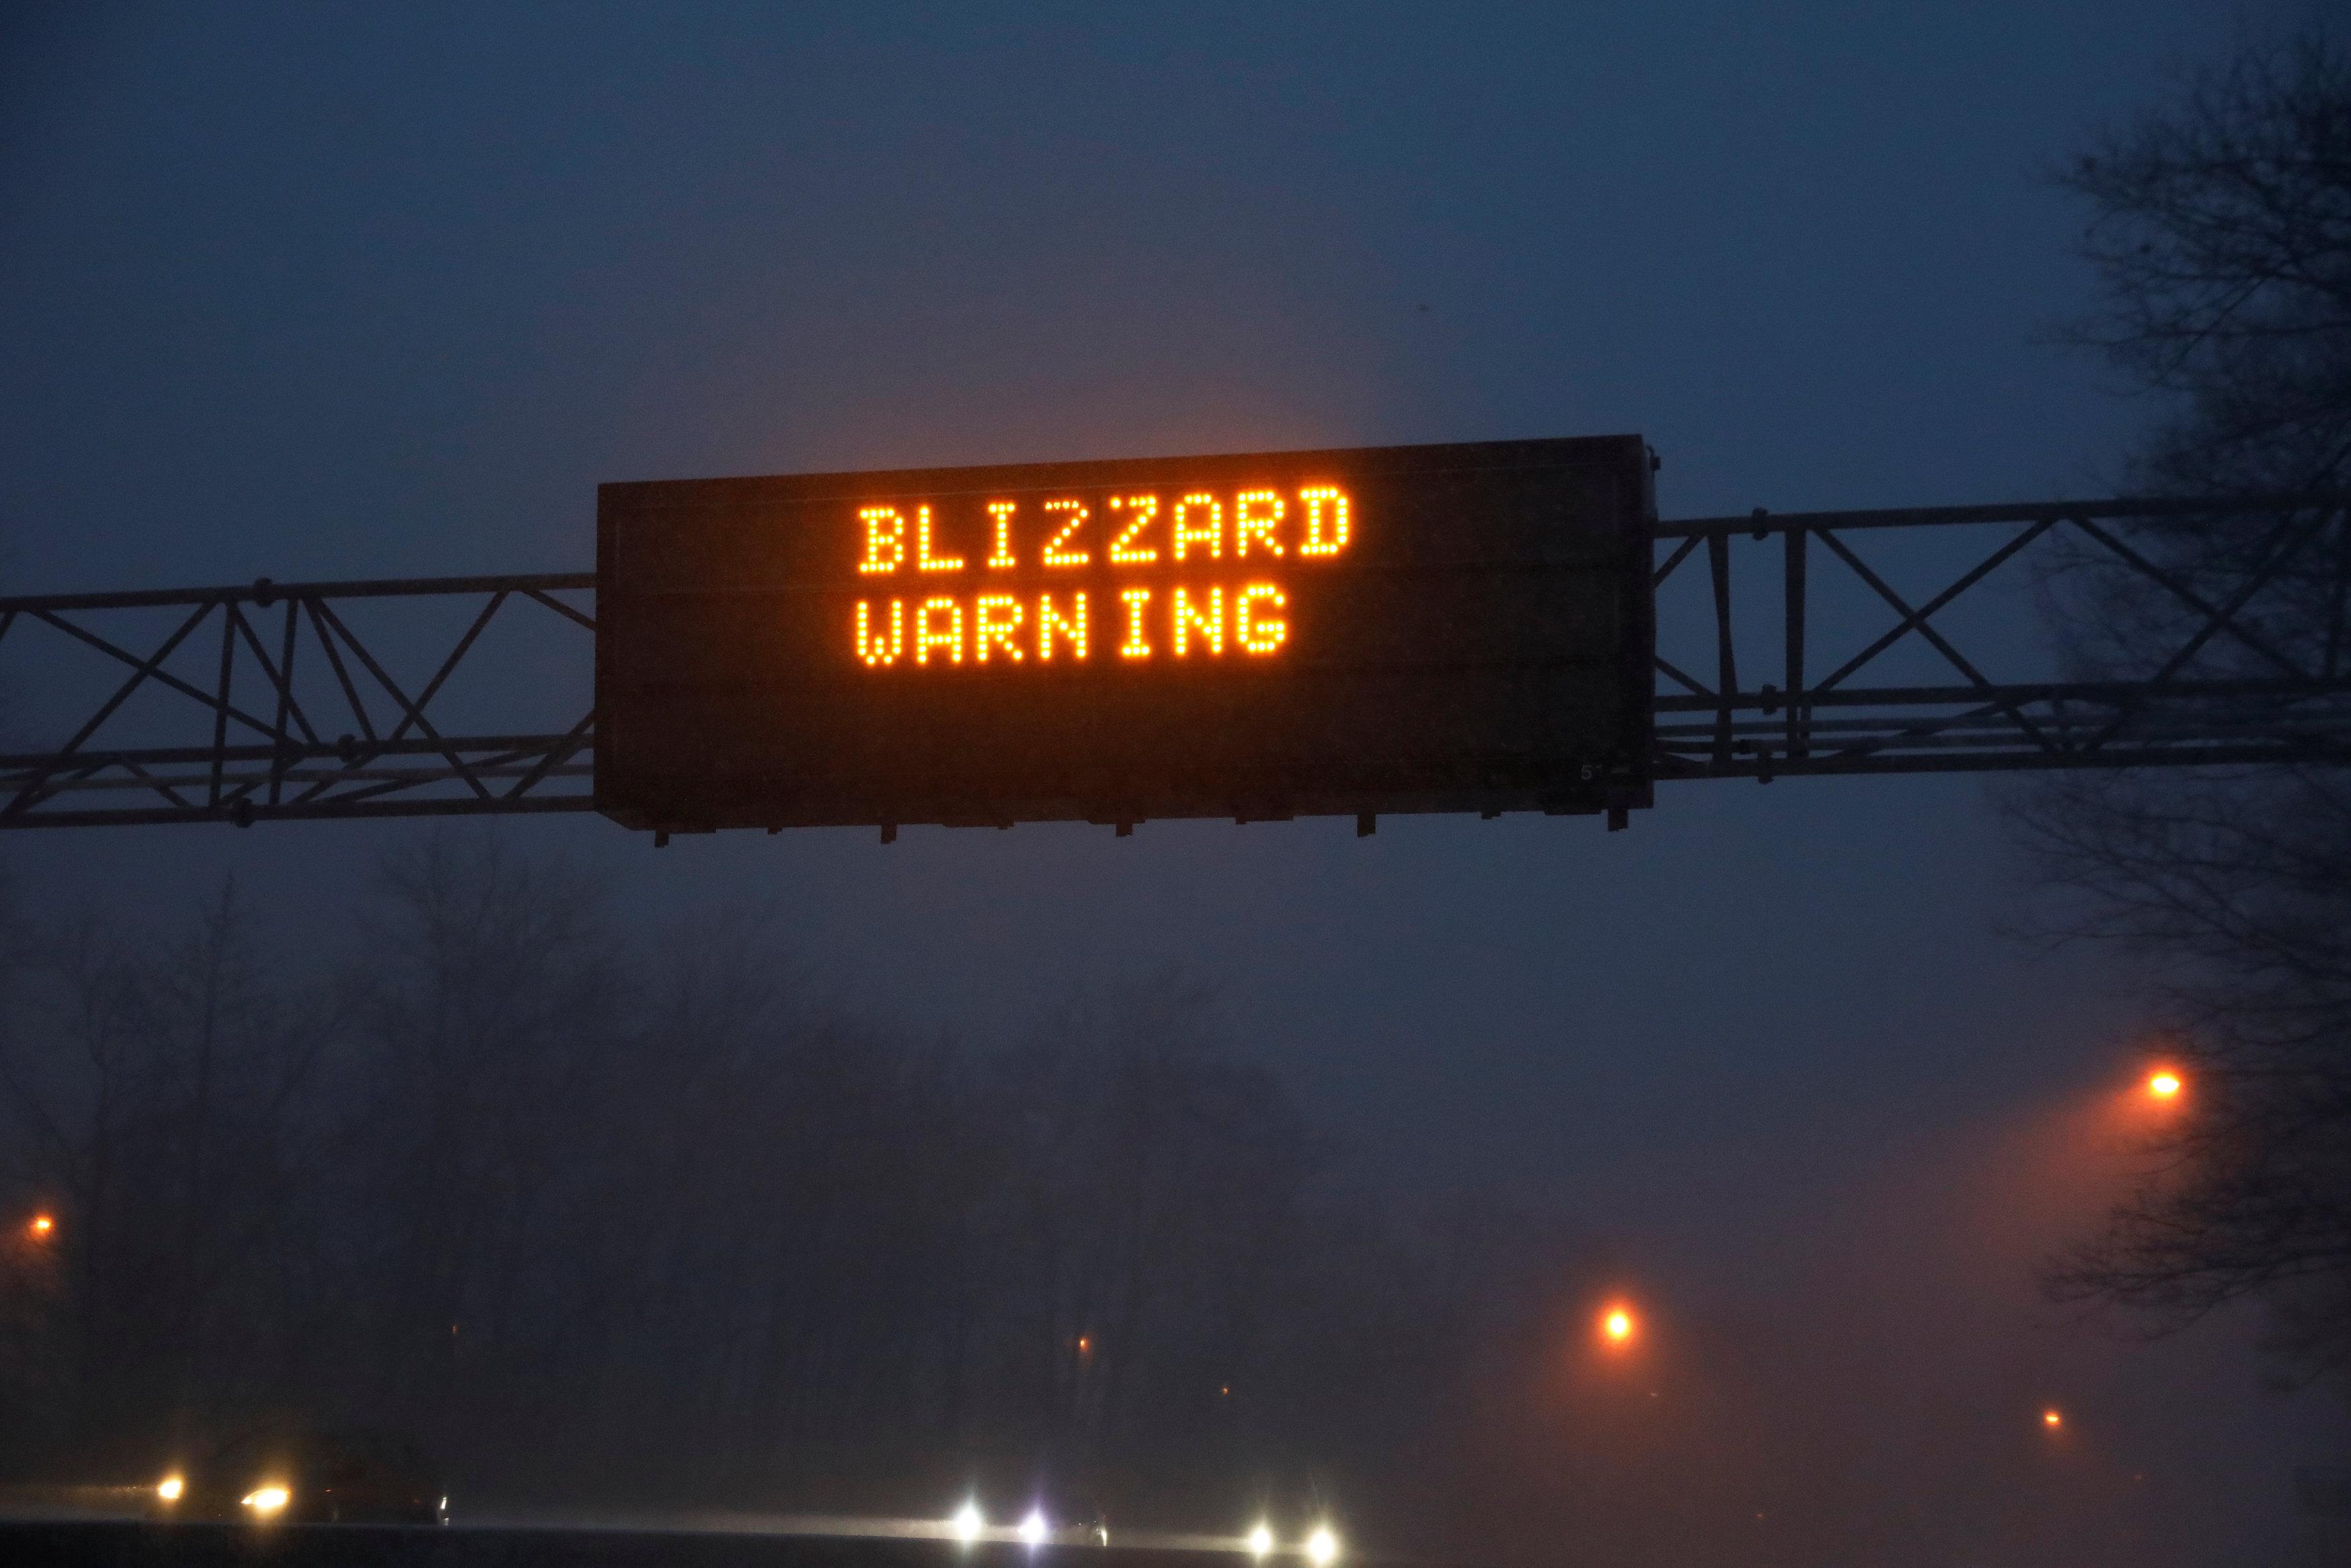 In blizzard's icy wake, intense cold grips US Northeast